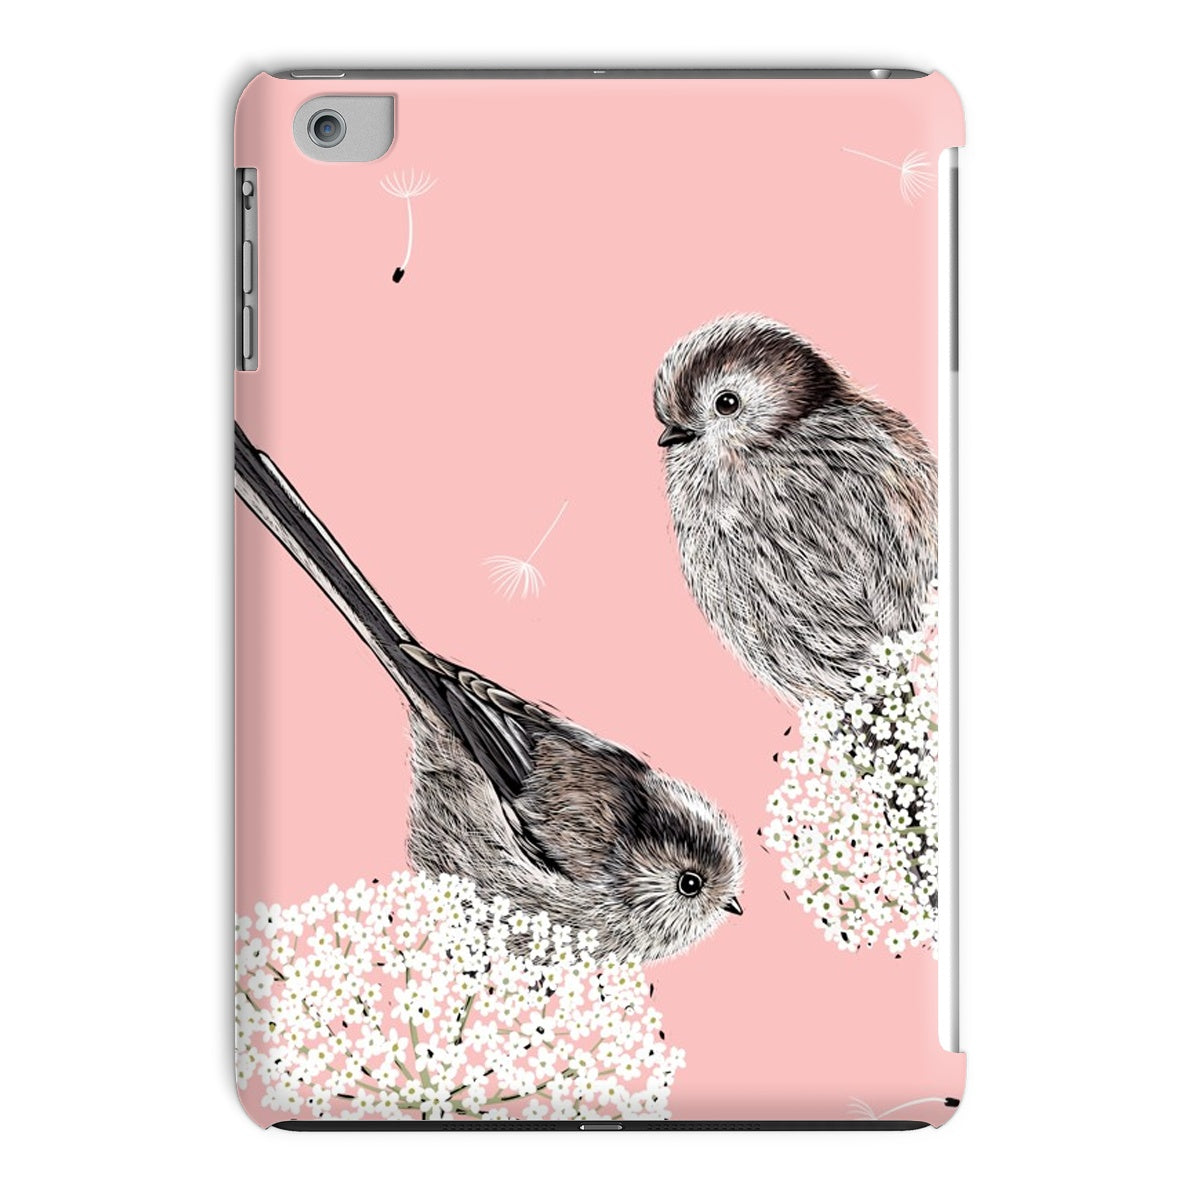 Long Tailed Tits Tablet Case